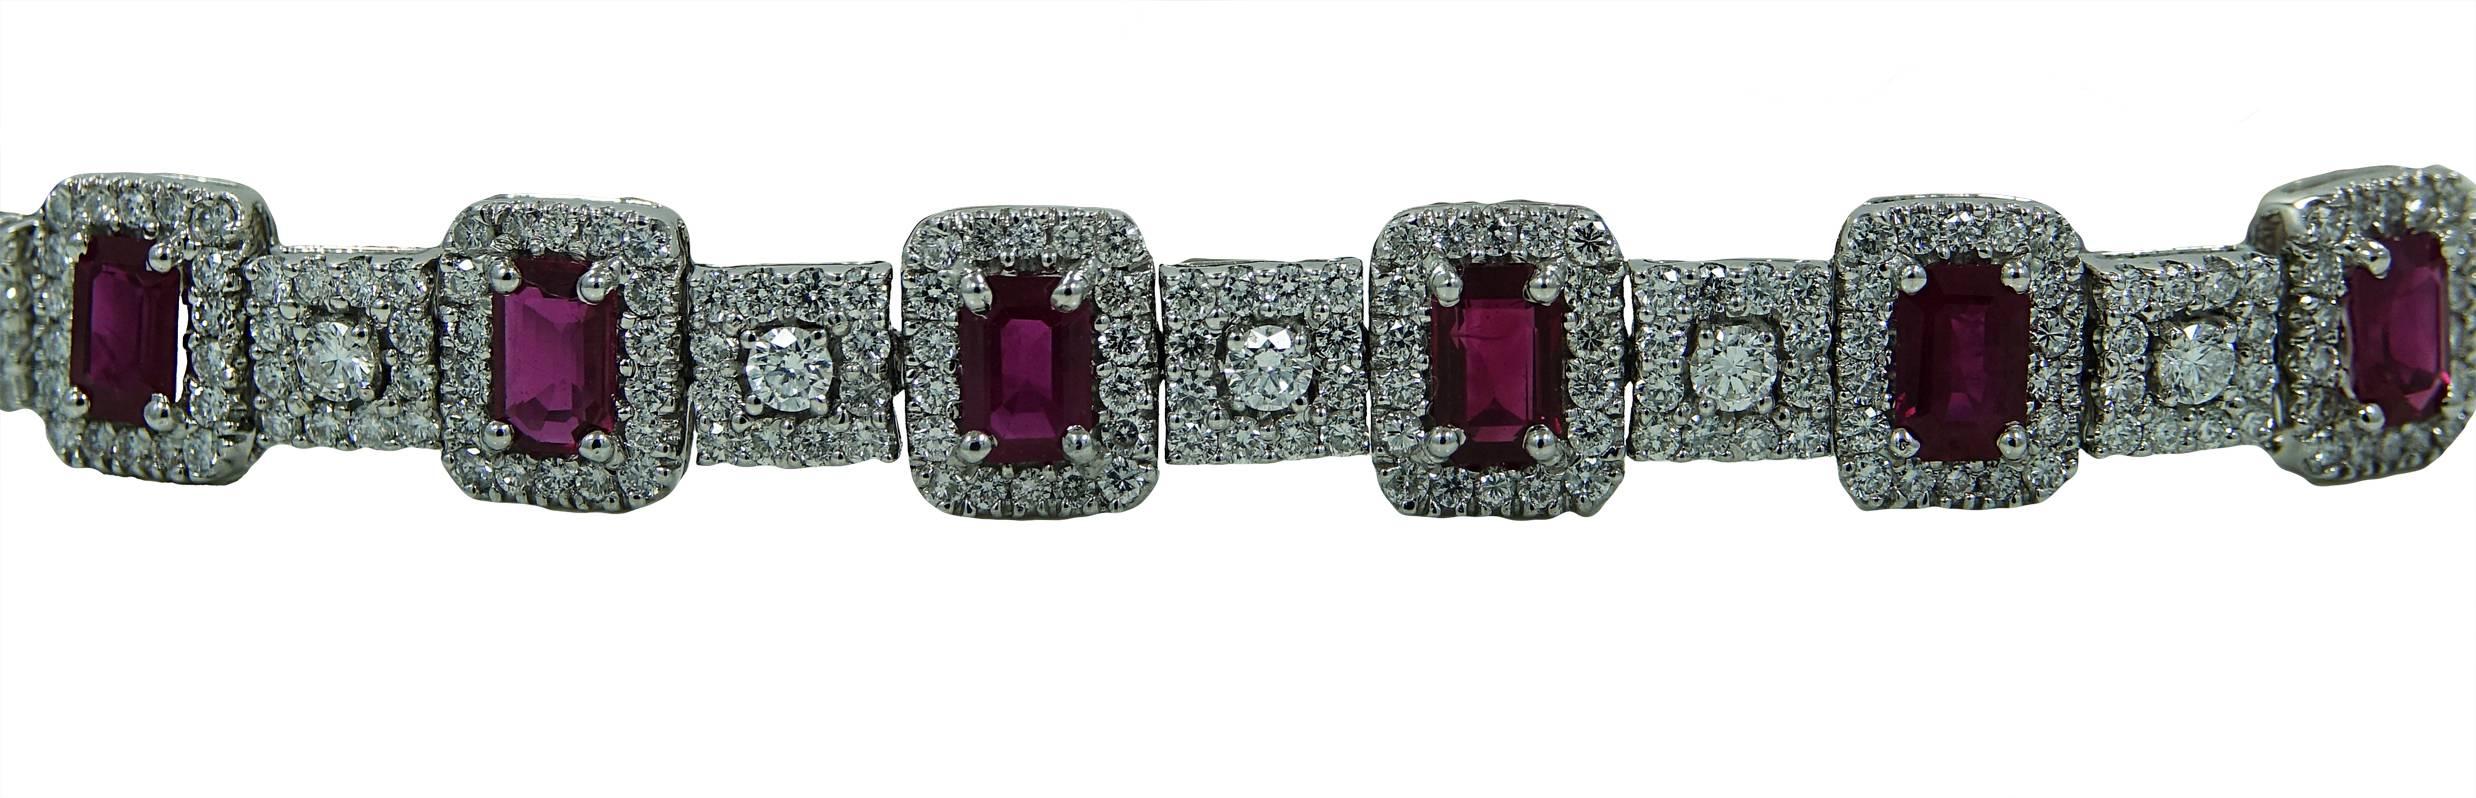 18K White Gold Bracelet With 13 Emerald Cut Rubies Weighing A Total Carat Weight Of 7.50 and Surrounding Diamonds Weighing A Total Carat Weight Of 5.63ct. This Bracelet Hooks Together Using A Box Clasp and Is 8 Inches In Length.